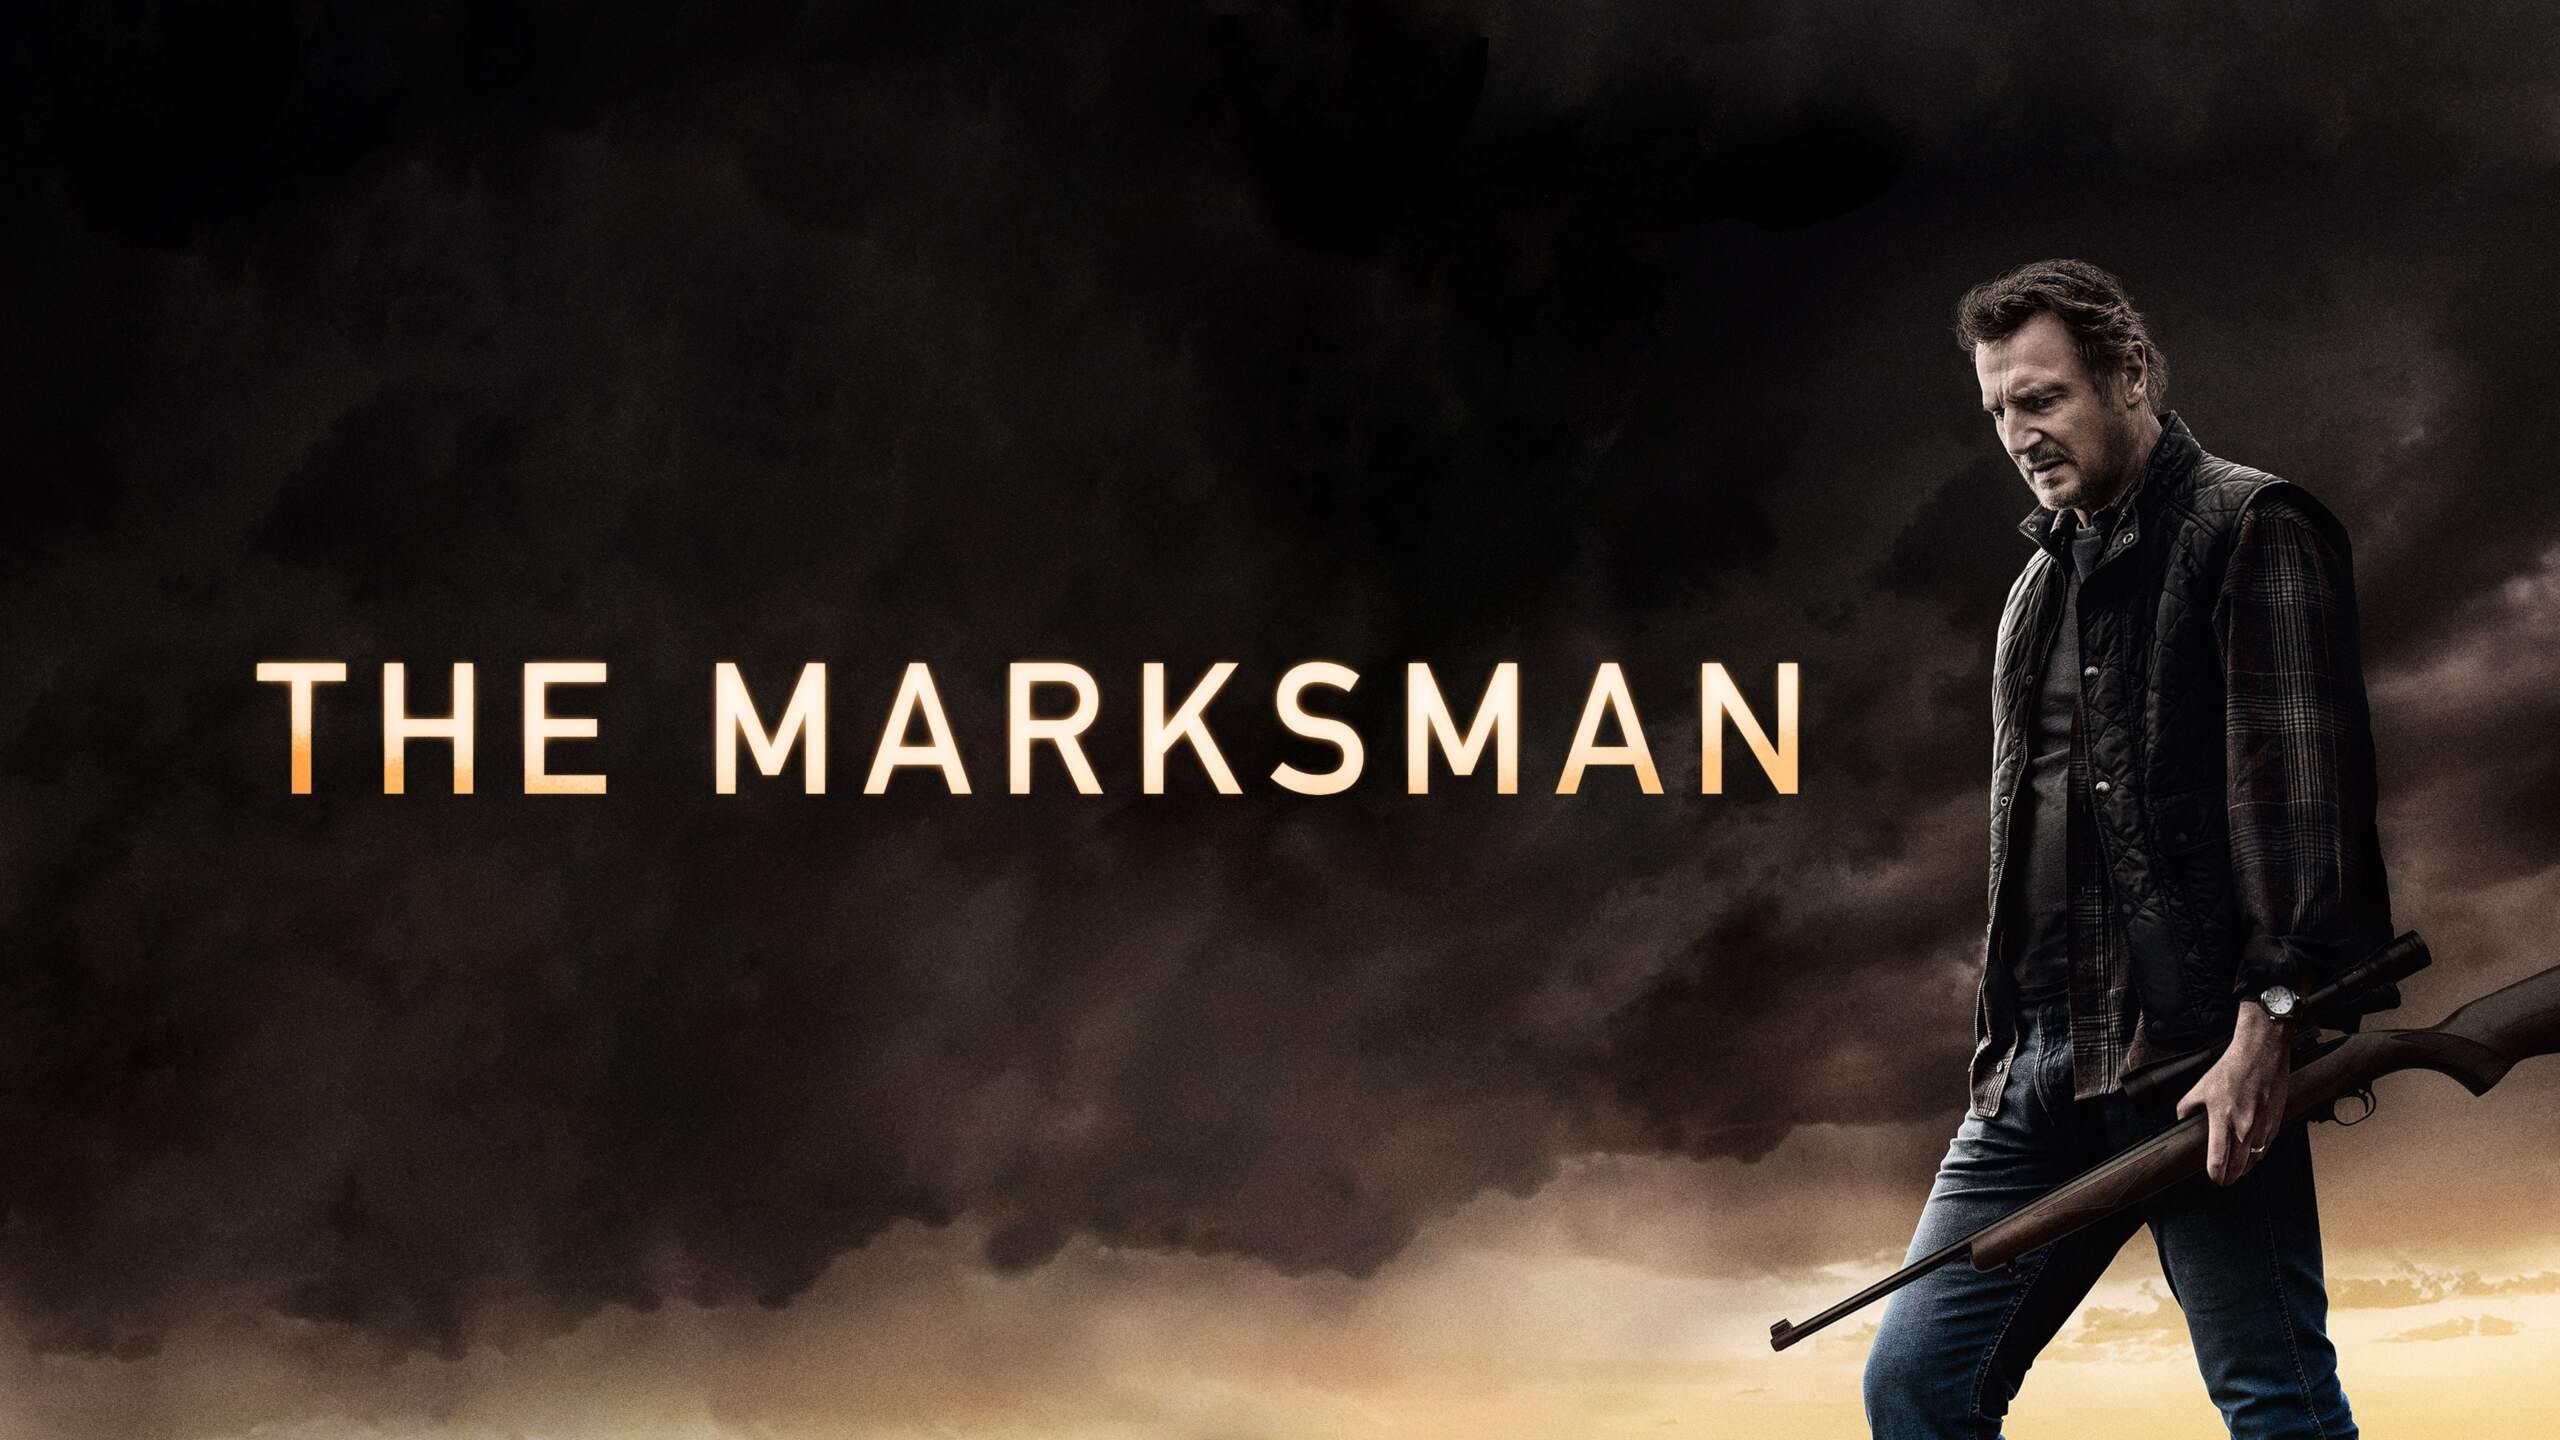 The poster of The Marksman